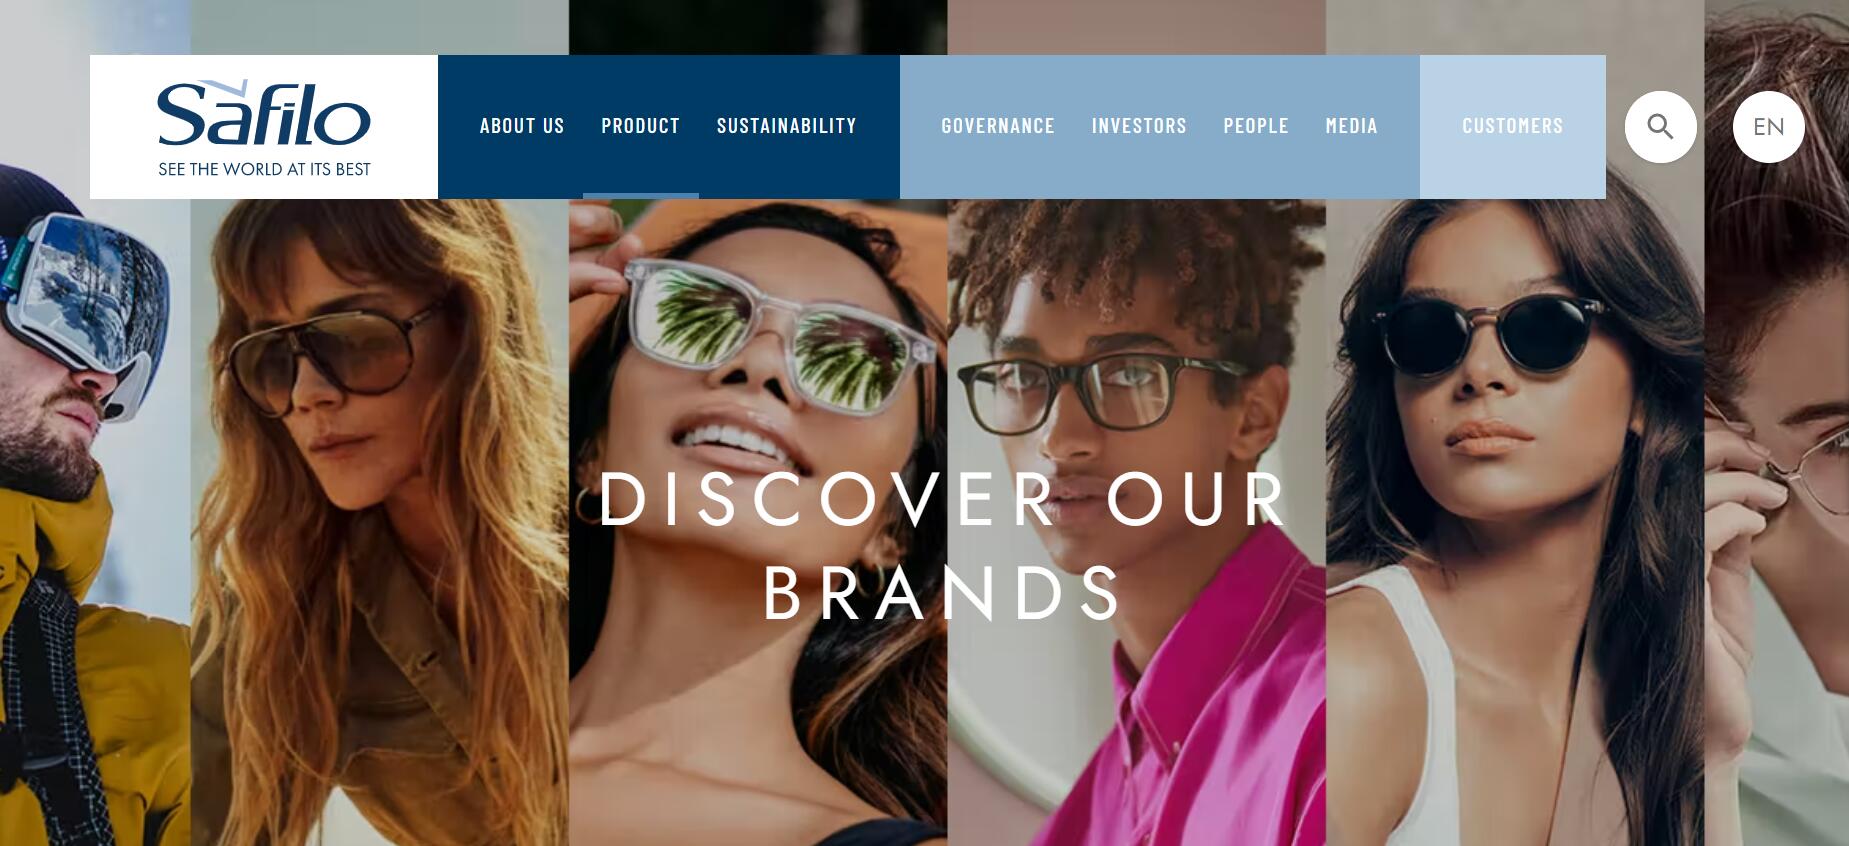 Safilo Reported Better-than-expected Sales of $1.08 Billion in FY2022, with Plan to Increase its Home Brands Shares to 50%